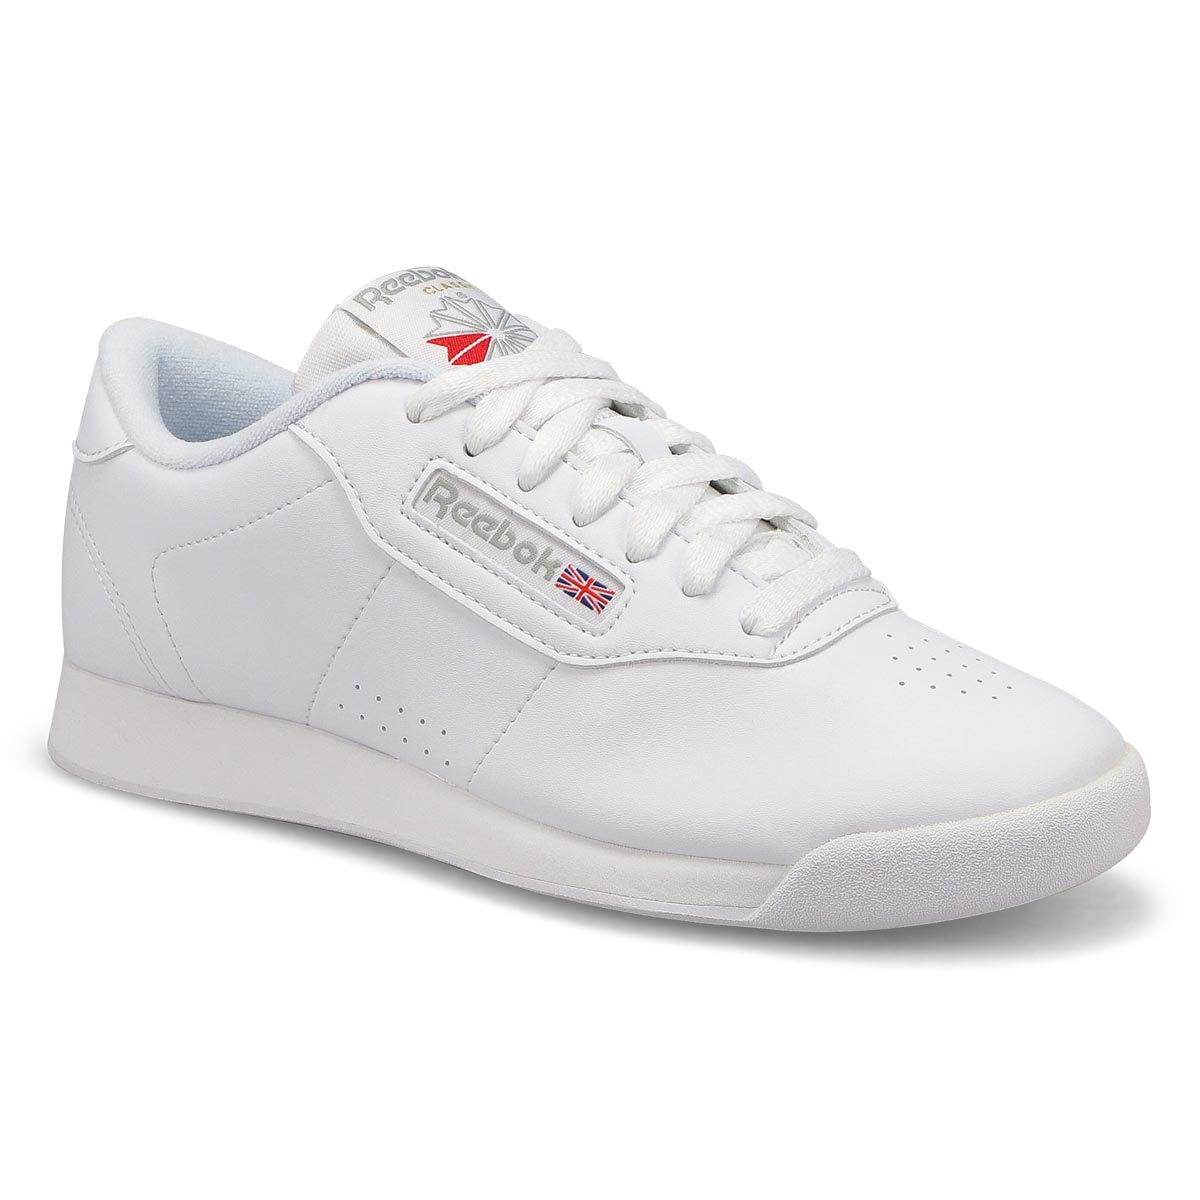 Women's Princess Leather Lace Up Sneaker - White